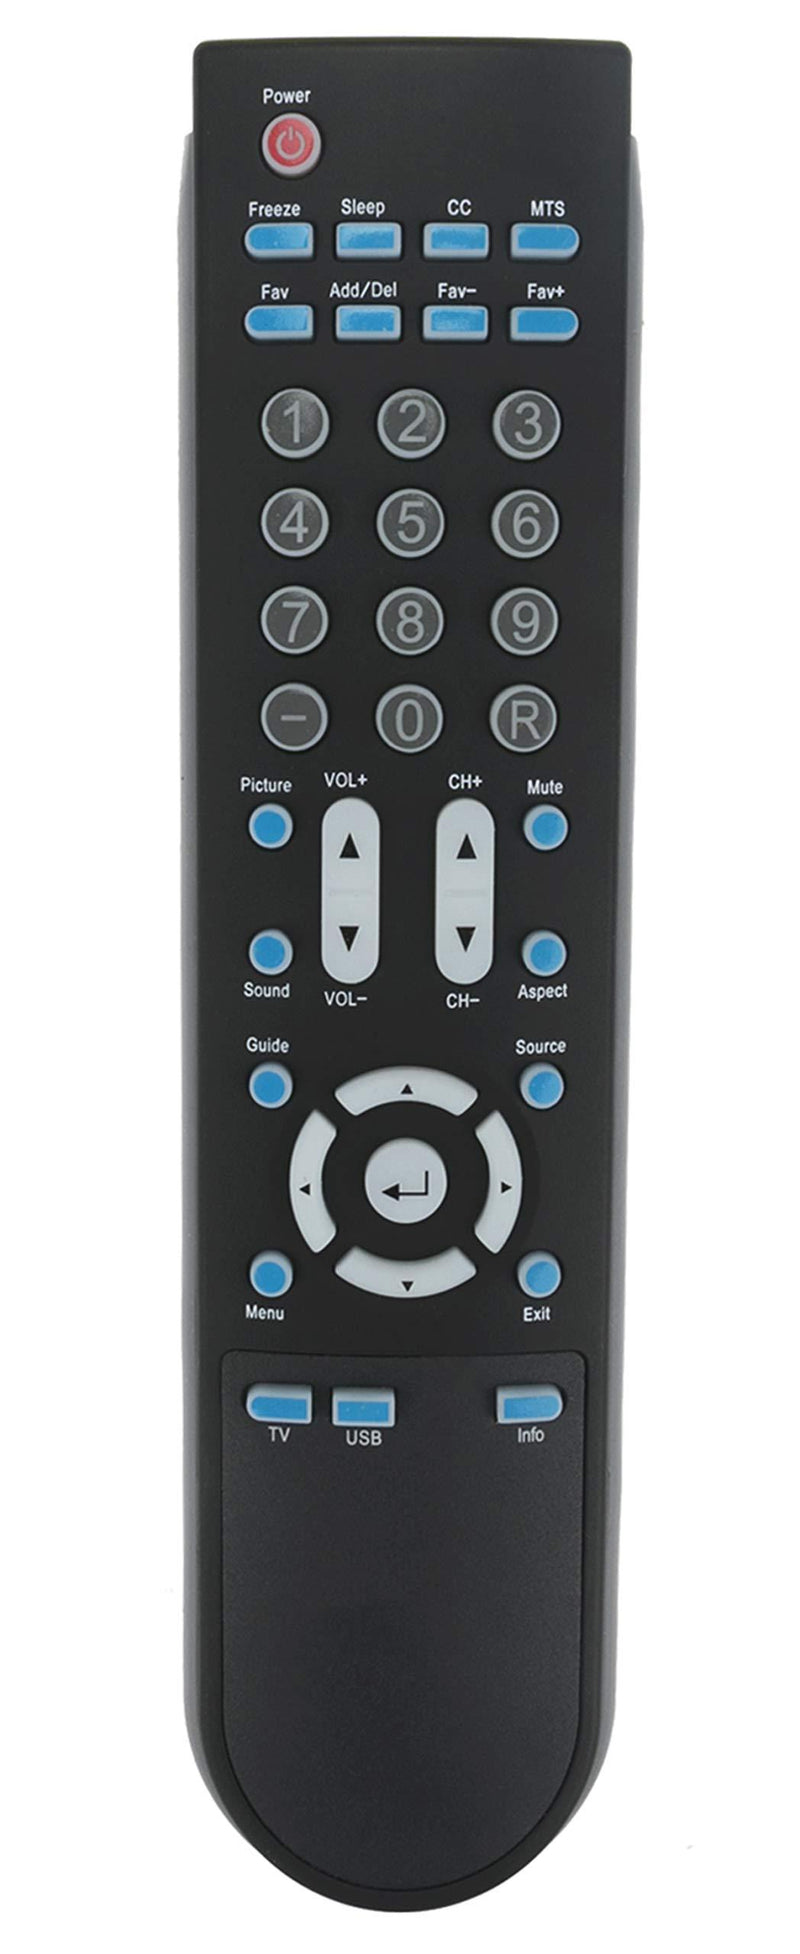 AULCMEET Remote Control Compatible with Sceptre TV KR002B002 X505BV-FHD X460BV-FHD X460 X425BV-FHD X425 X409BV-FHD X402BV-FHD X405BV-FHD3 X405BV-FHD X408BV-FHD X420BV-FHD